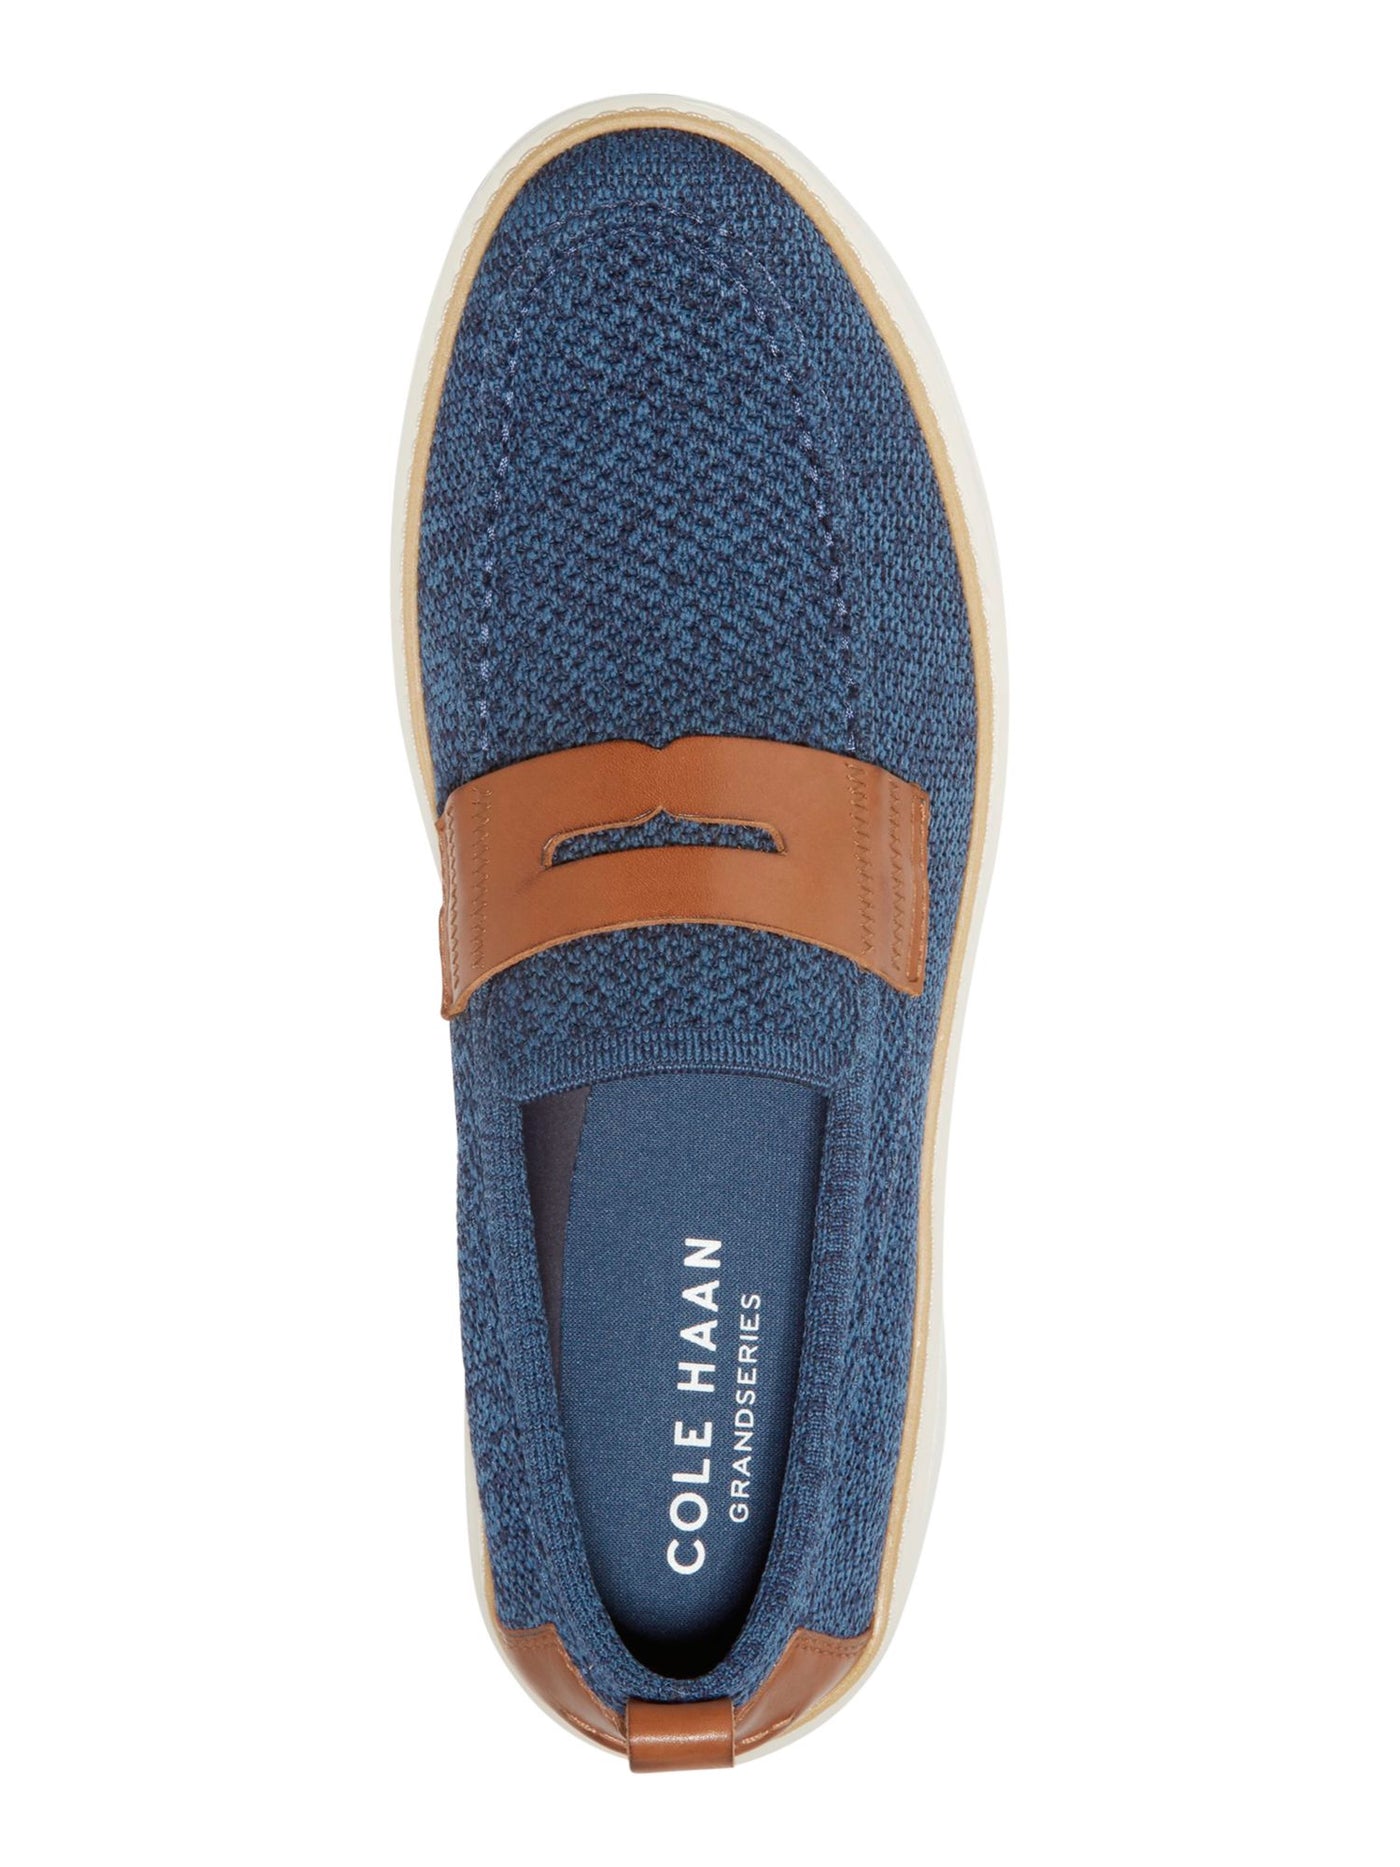 COLE HAAN GRANDSERIES Mens Blue Knit Contrast Penny Keeper Back Pull-Tab Cushioned Topspin Round Toe Wedge Slip On Loafers Shoes 9.5 M